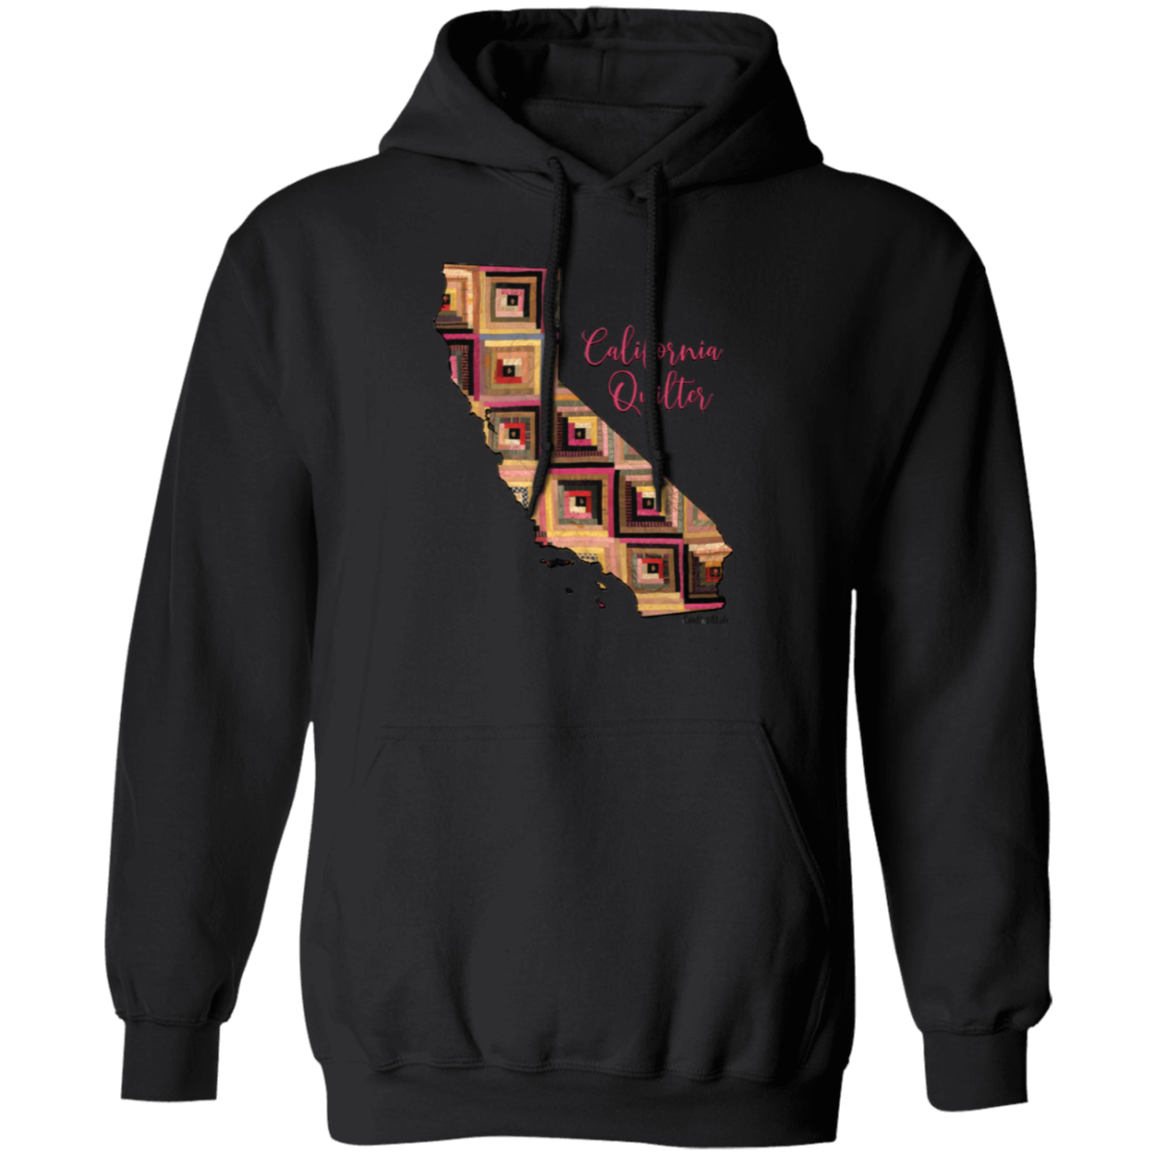 California Quilter Pullover Hoodie, Gift for Quilting Friends and Family